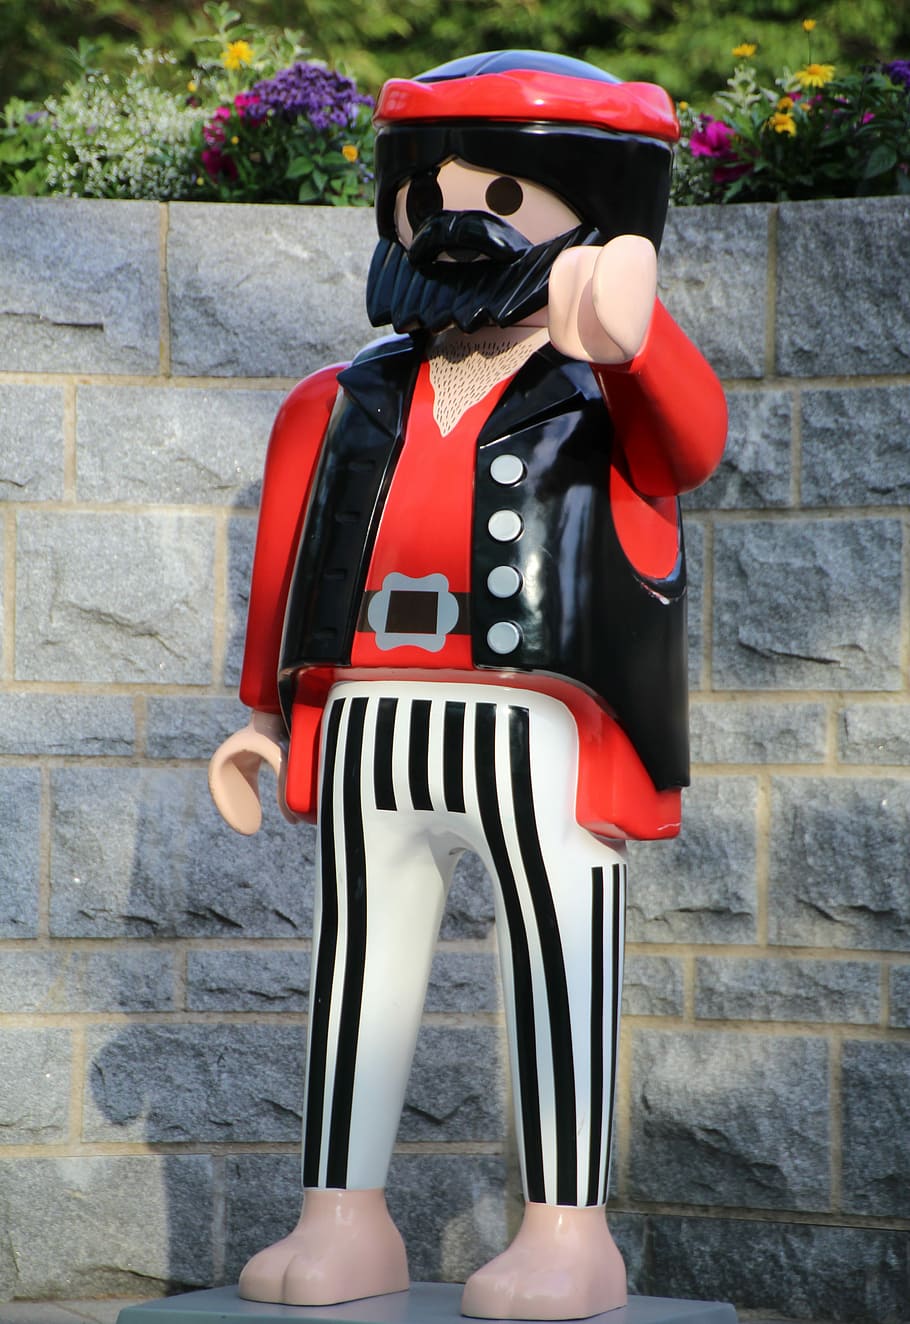 Playmobil, Pirate, Corsair, Toys, costume, humor, one person